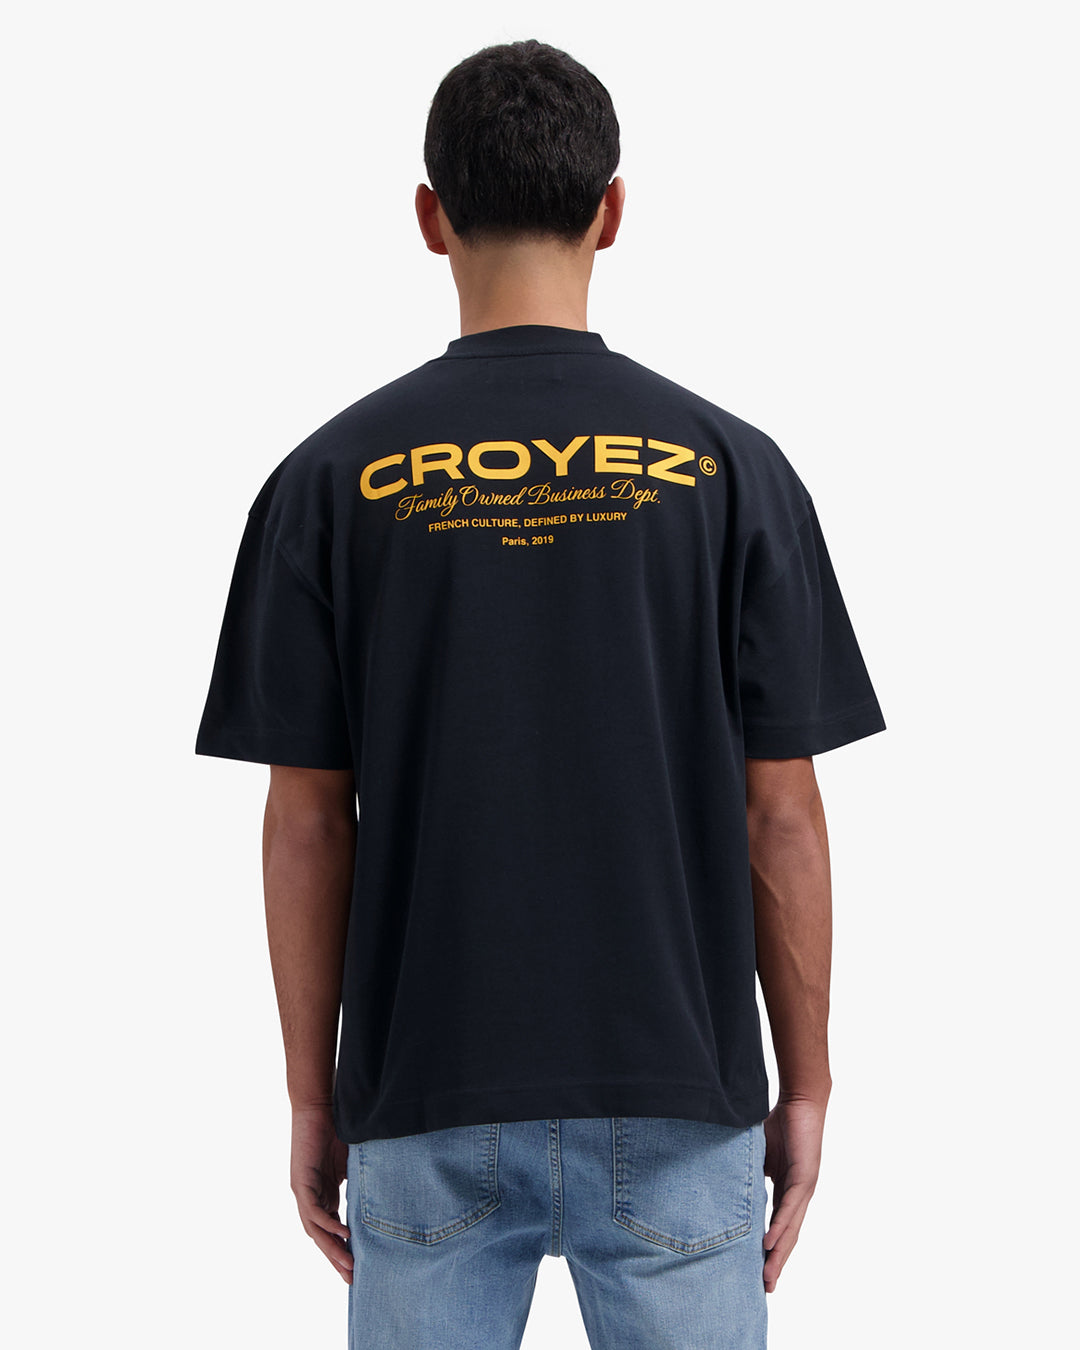 Croyez Family Owned Business T-shirt